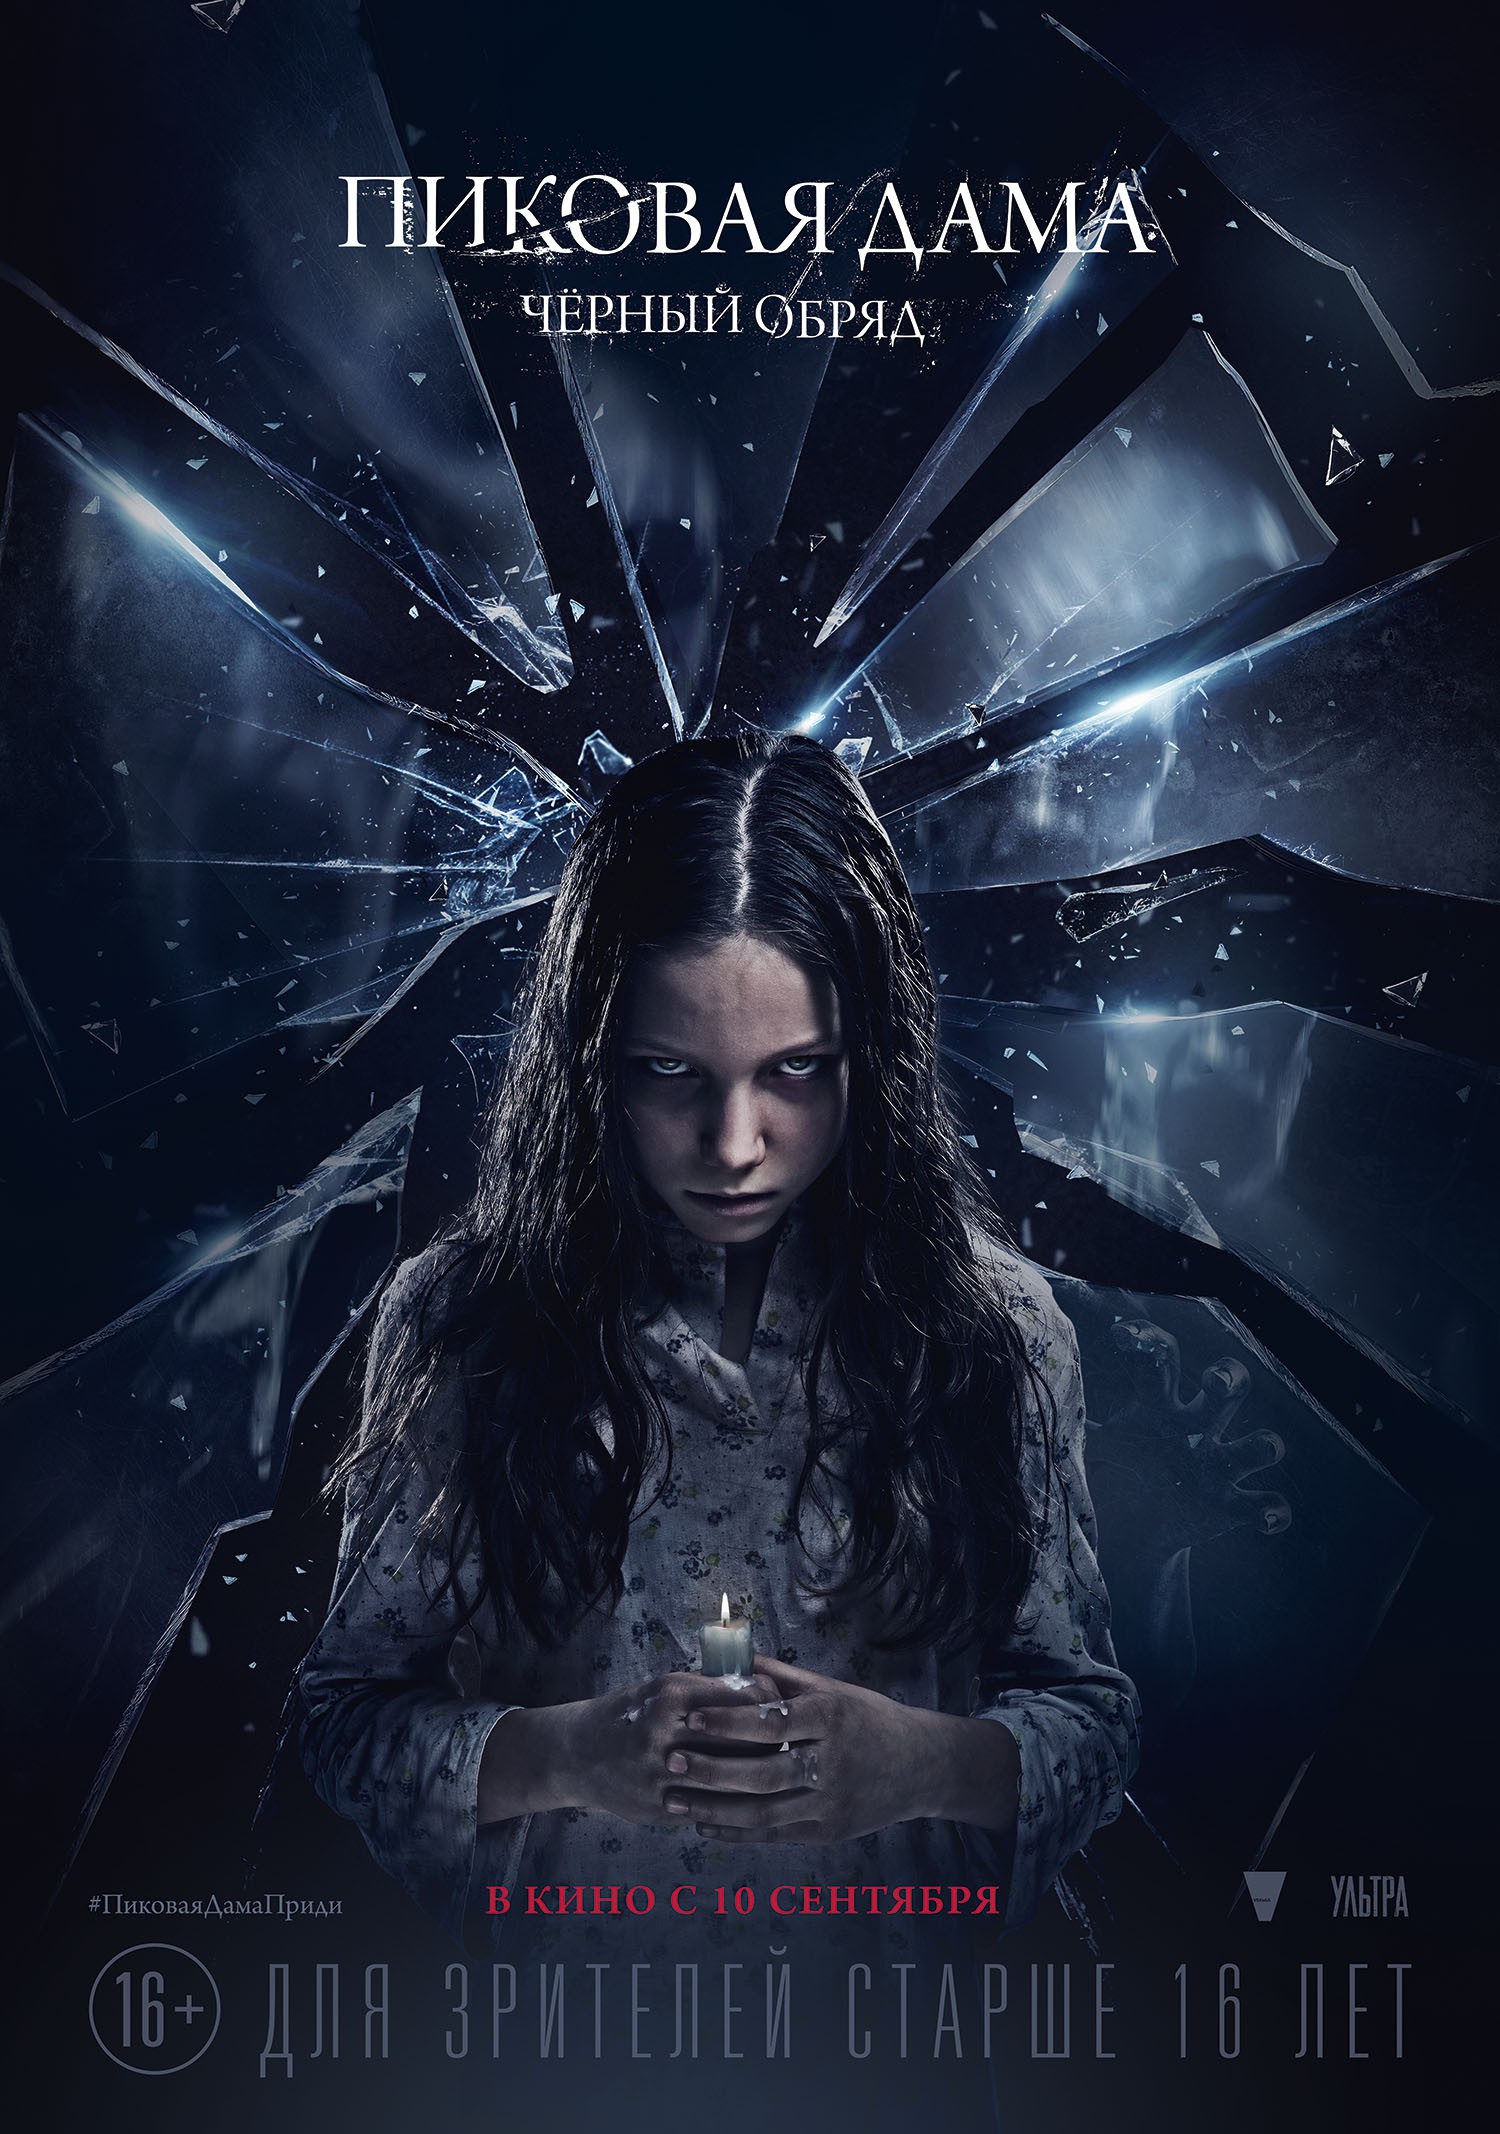 Mega Sized Movie Poster Image for Queen of Spades: The Dark Rite (#2 of 4)